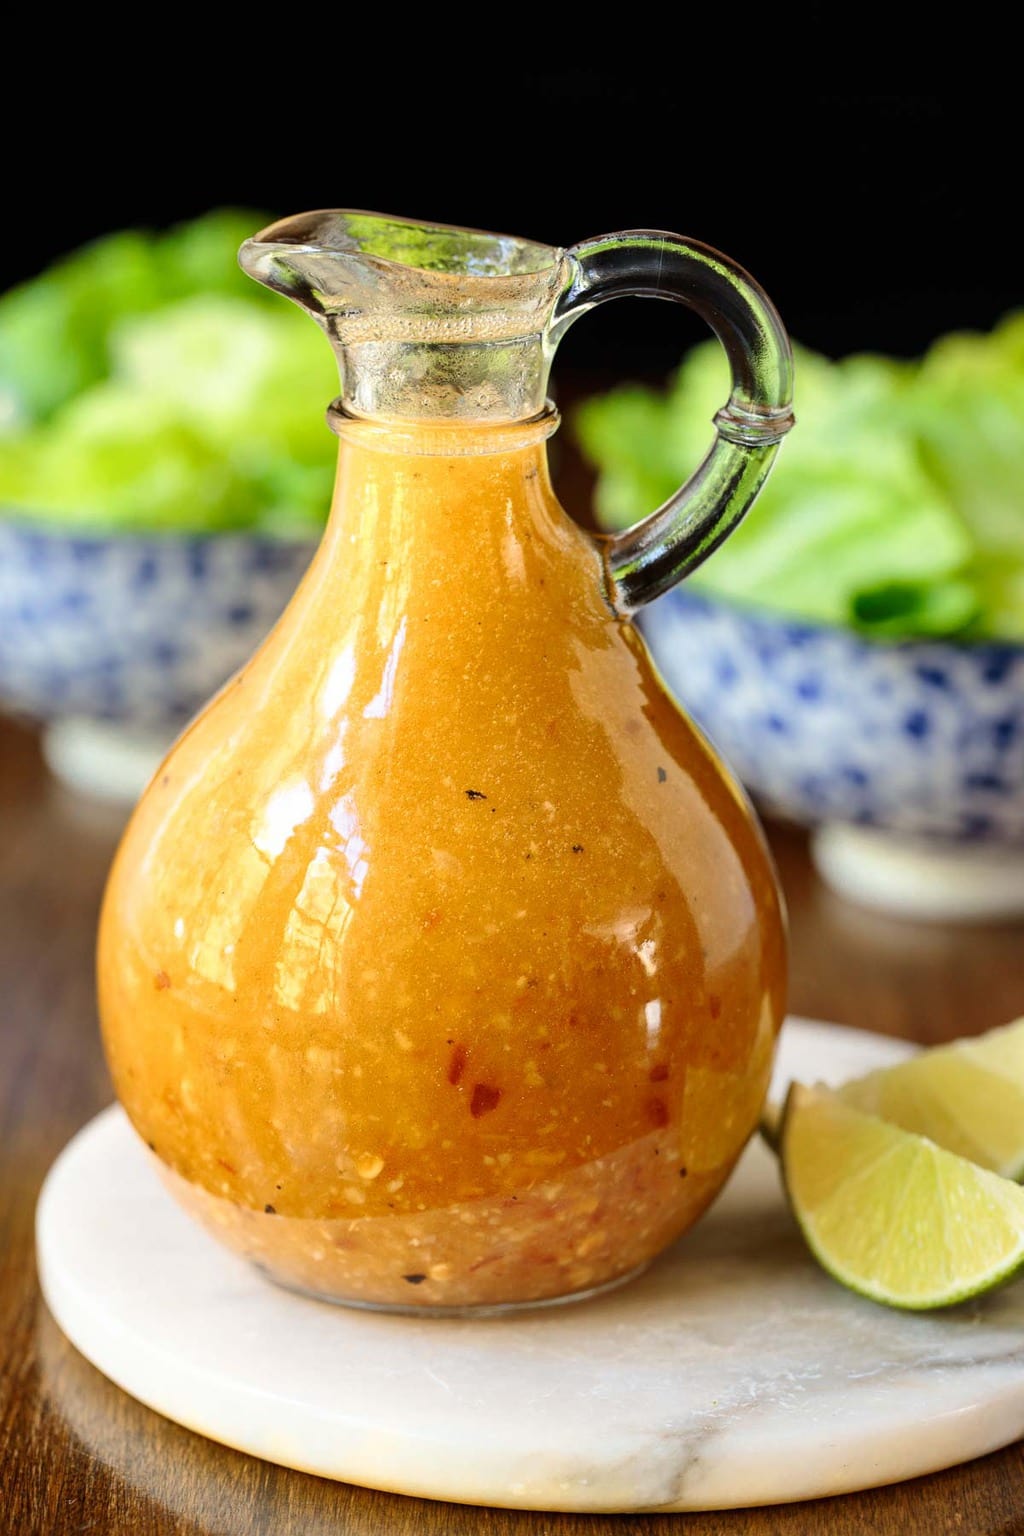 Vertical picture of Chili Lime Salad Dressing in a glass cruet